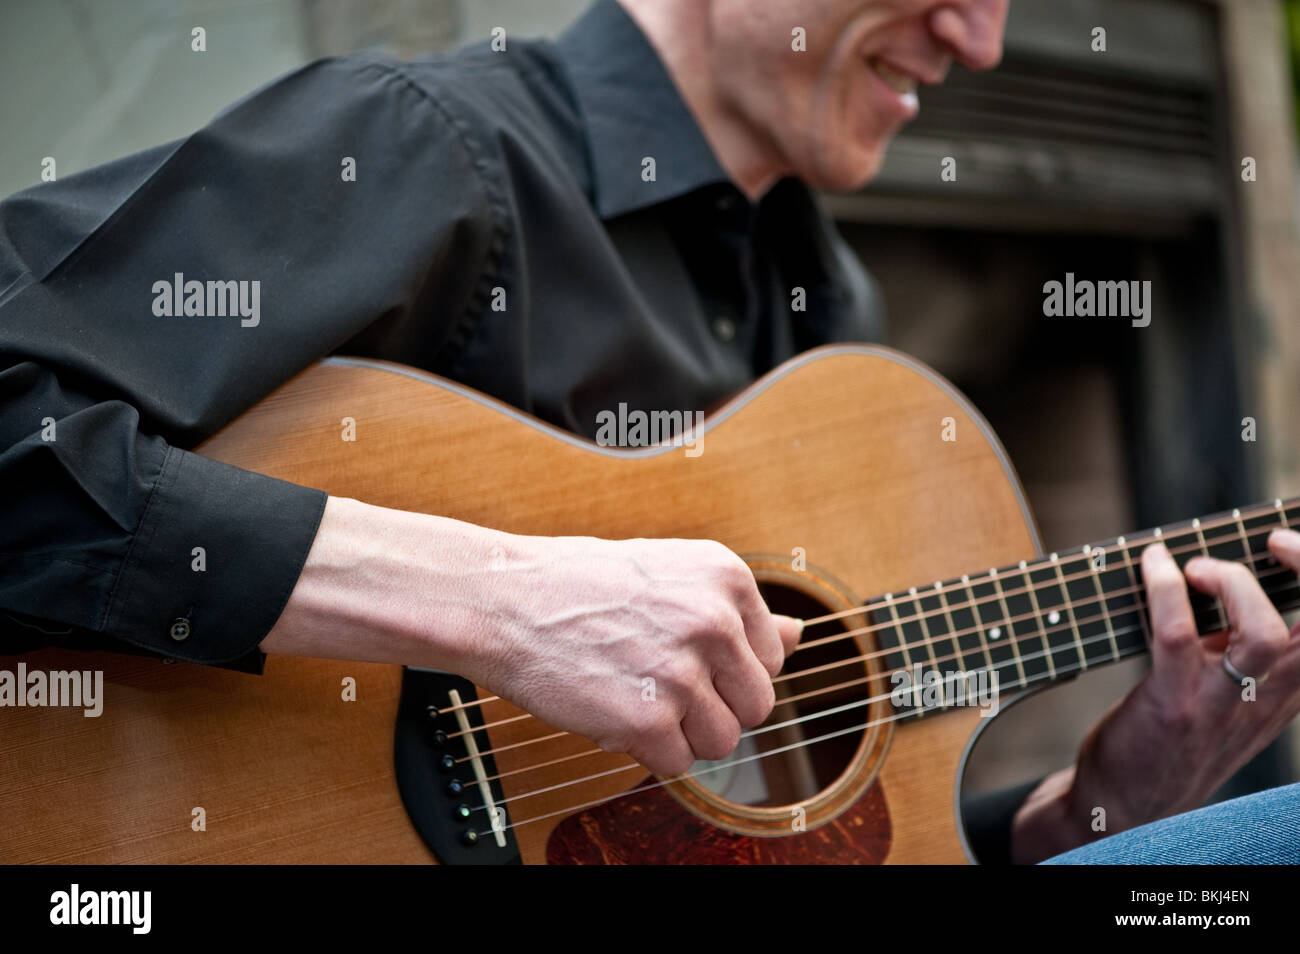 A close up view of a musician playing guitar Stock Photo